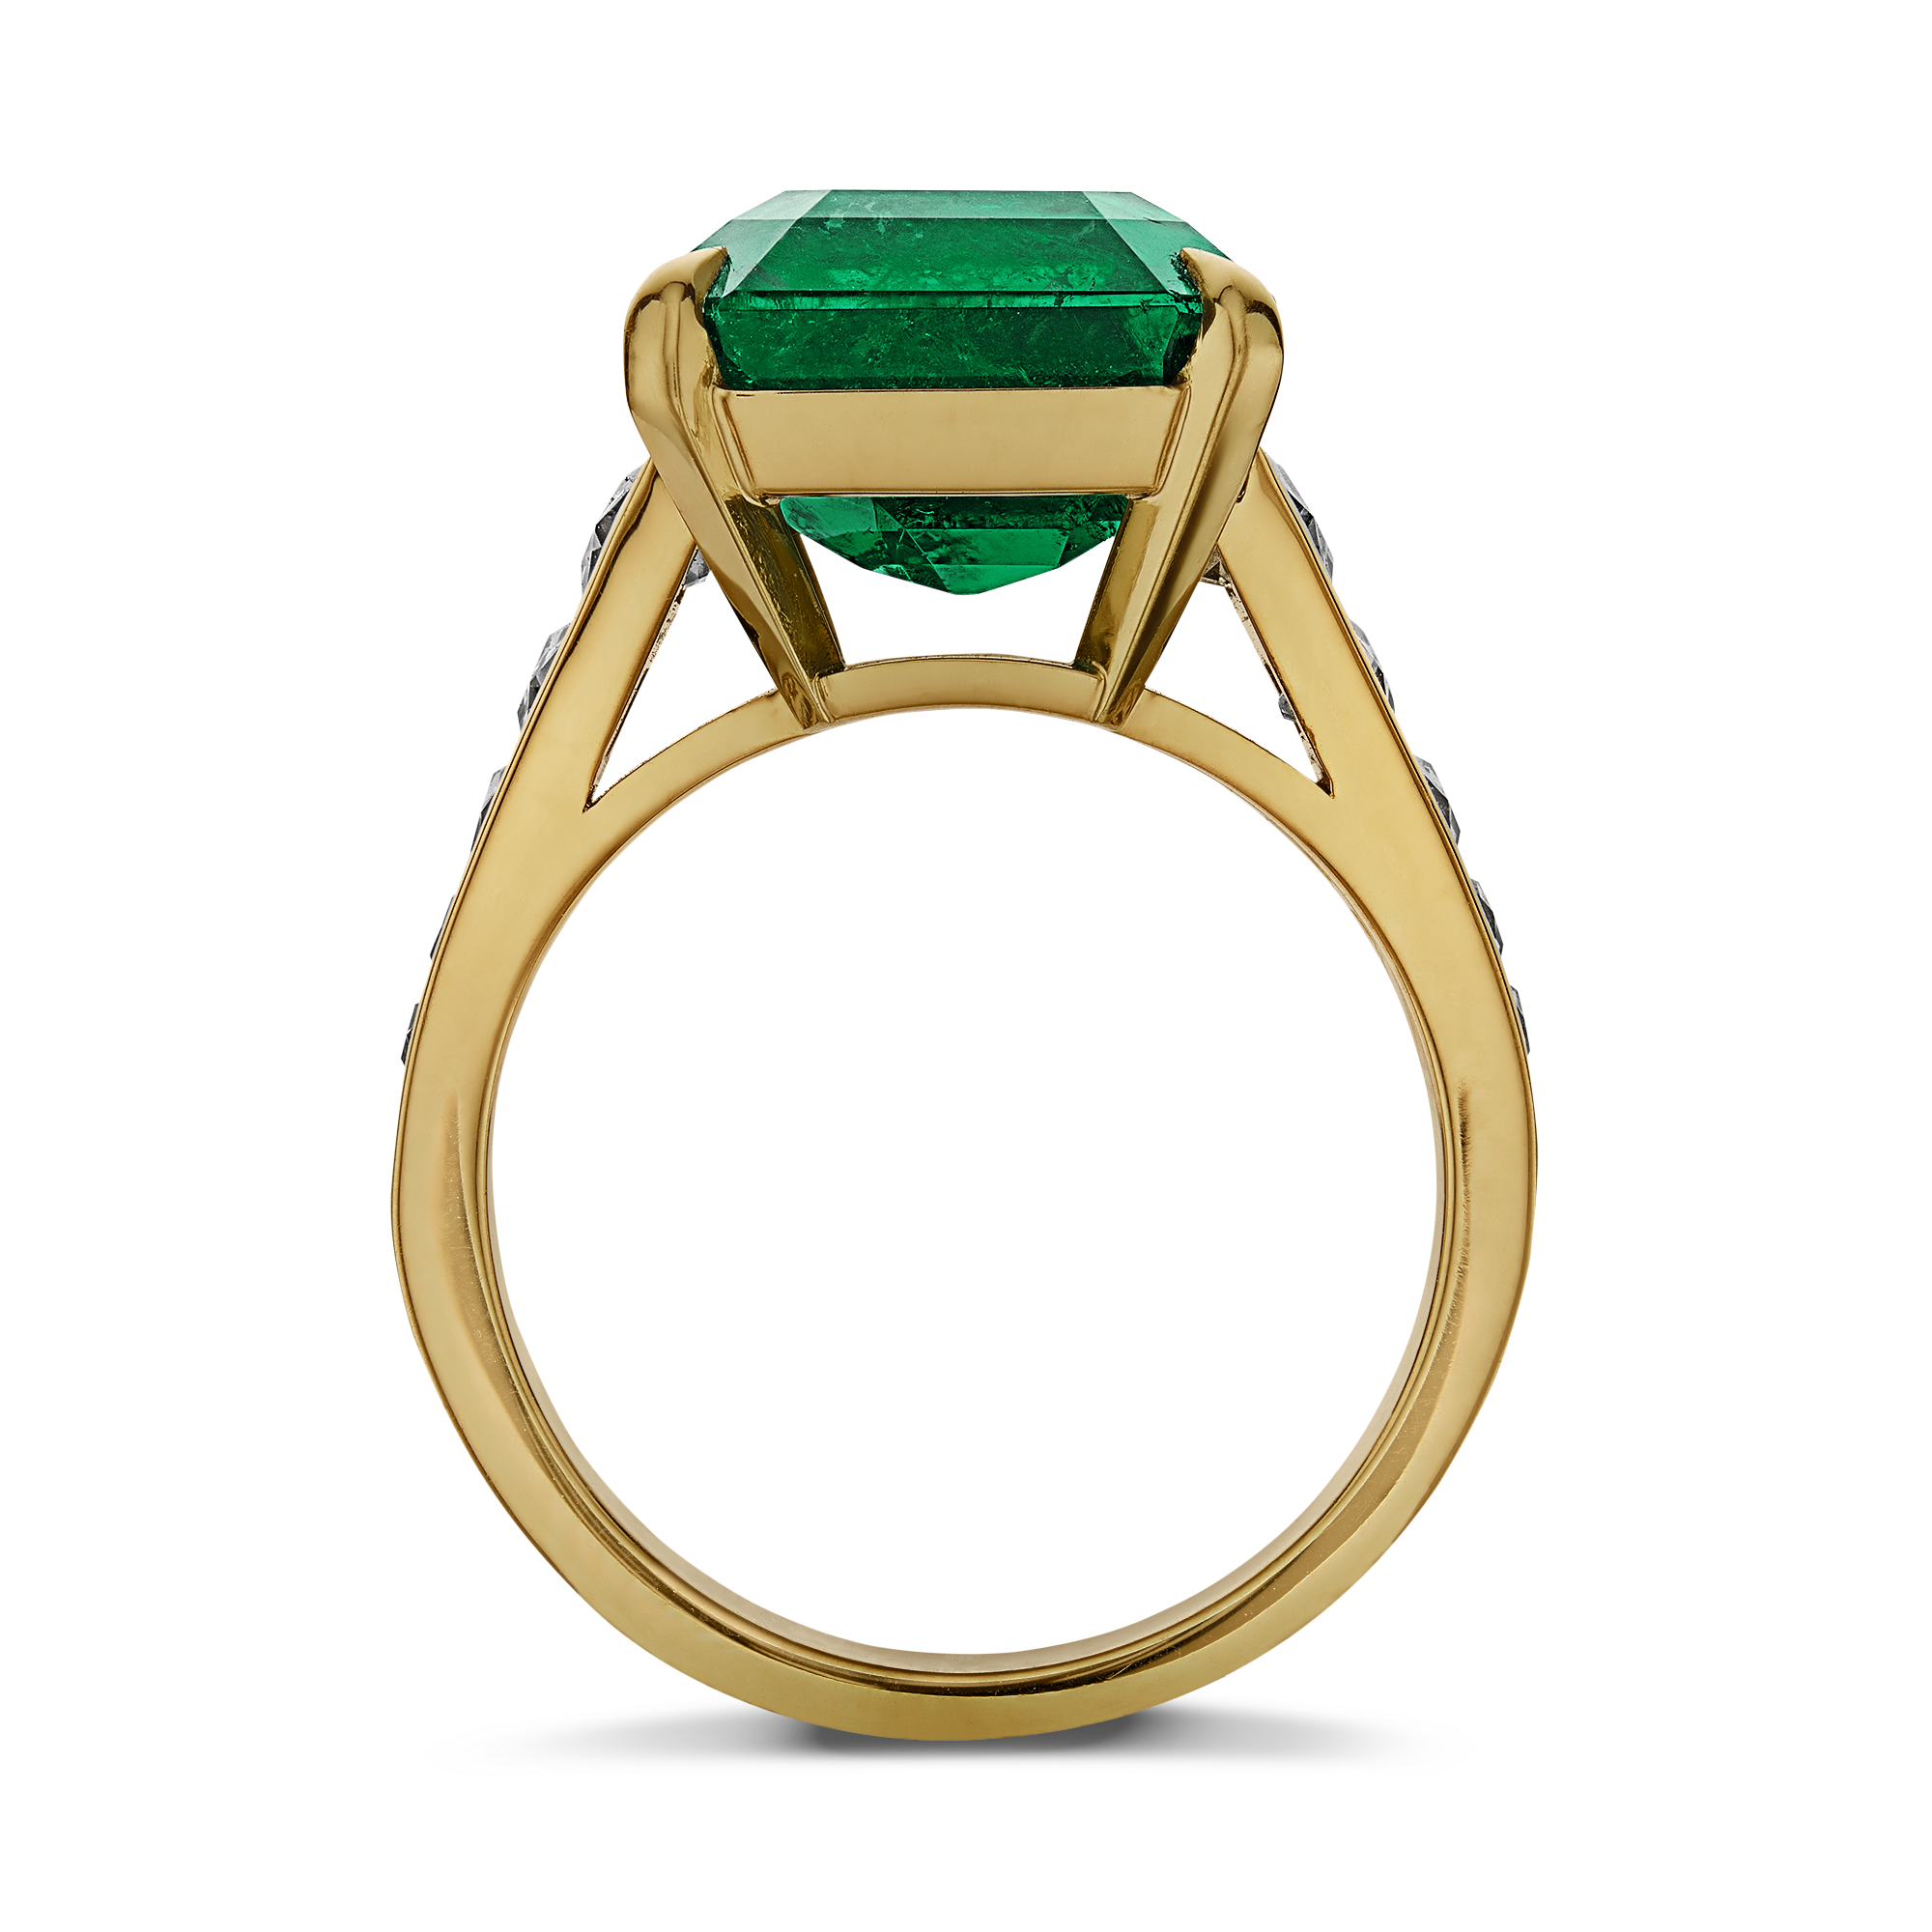 Masterpiece Pragnell Setting 8.58ct Colombian Emerald and Diamond Ring Octagon Cut, Claw Set_3